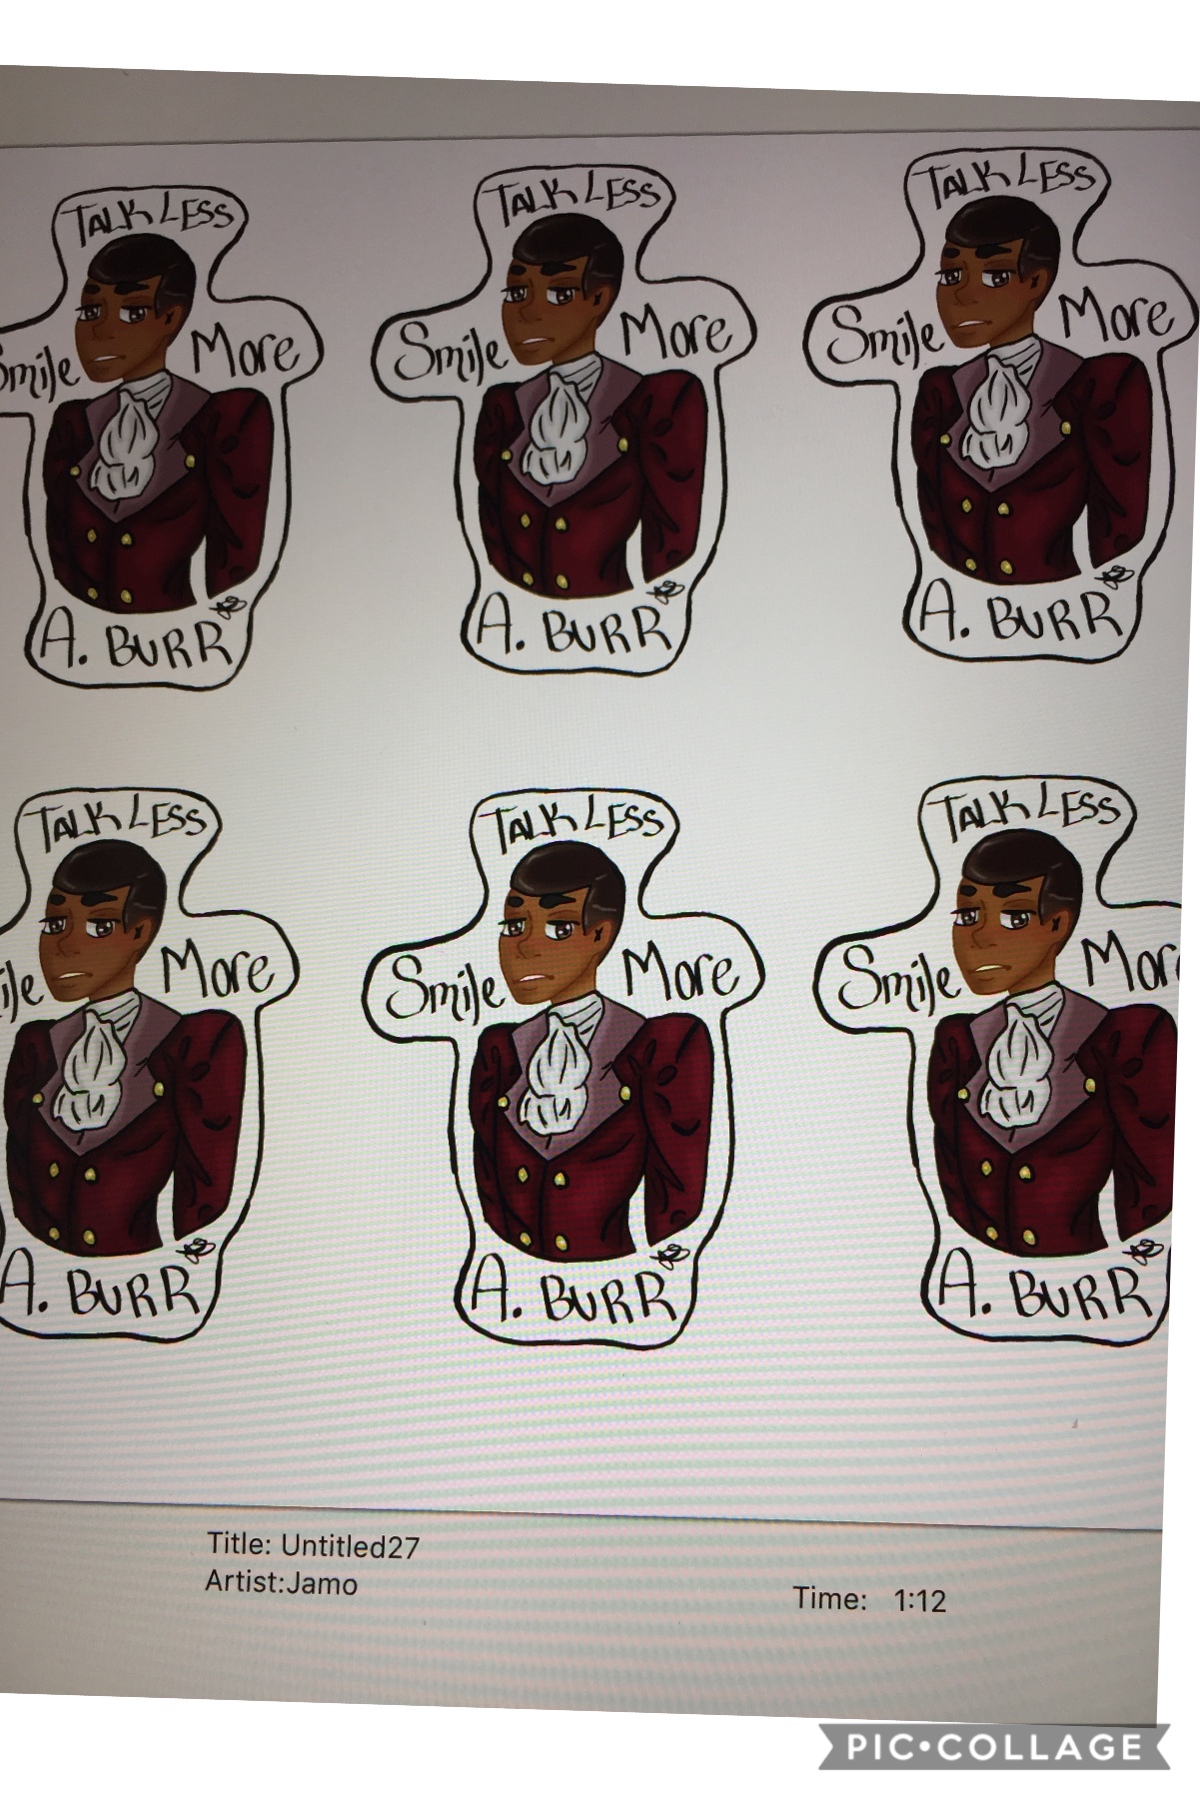 Aaron Burr stickers! Tap
Omg I’ve been reading a fan fiction for the past couple days and it ended so sadly and now I’m sad. 